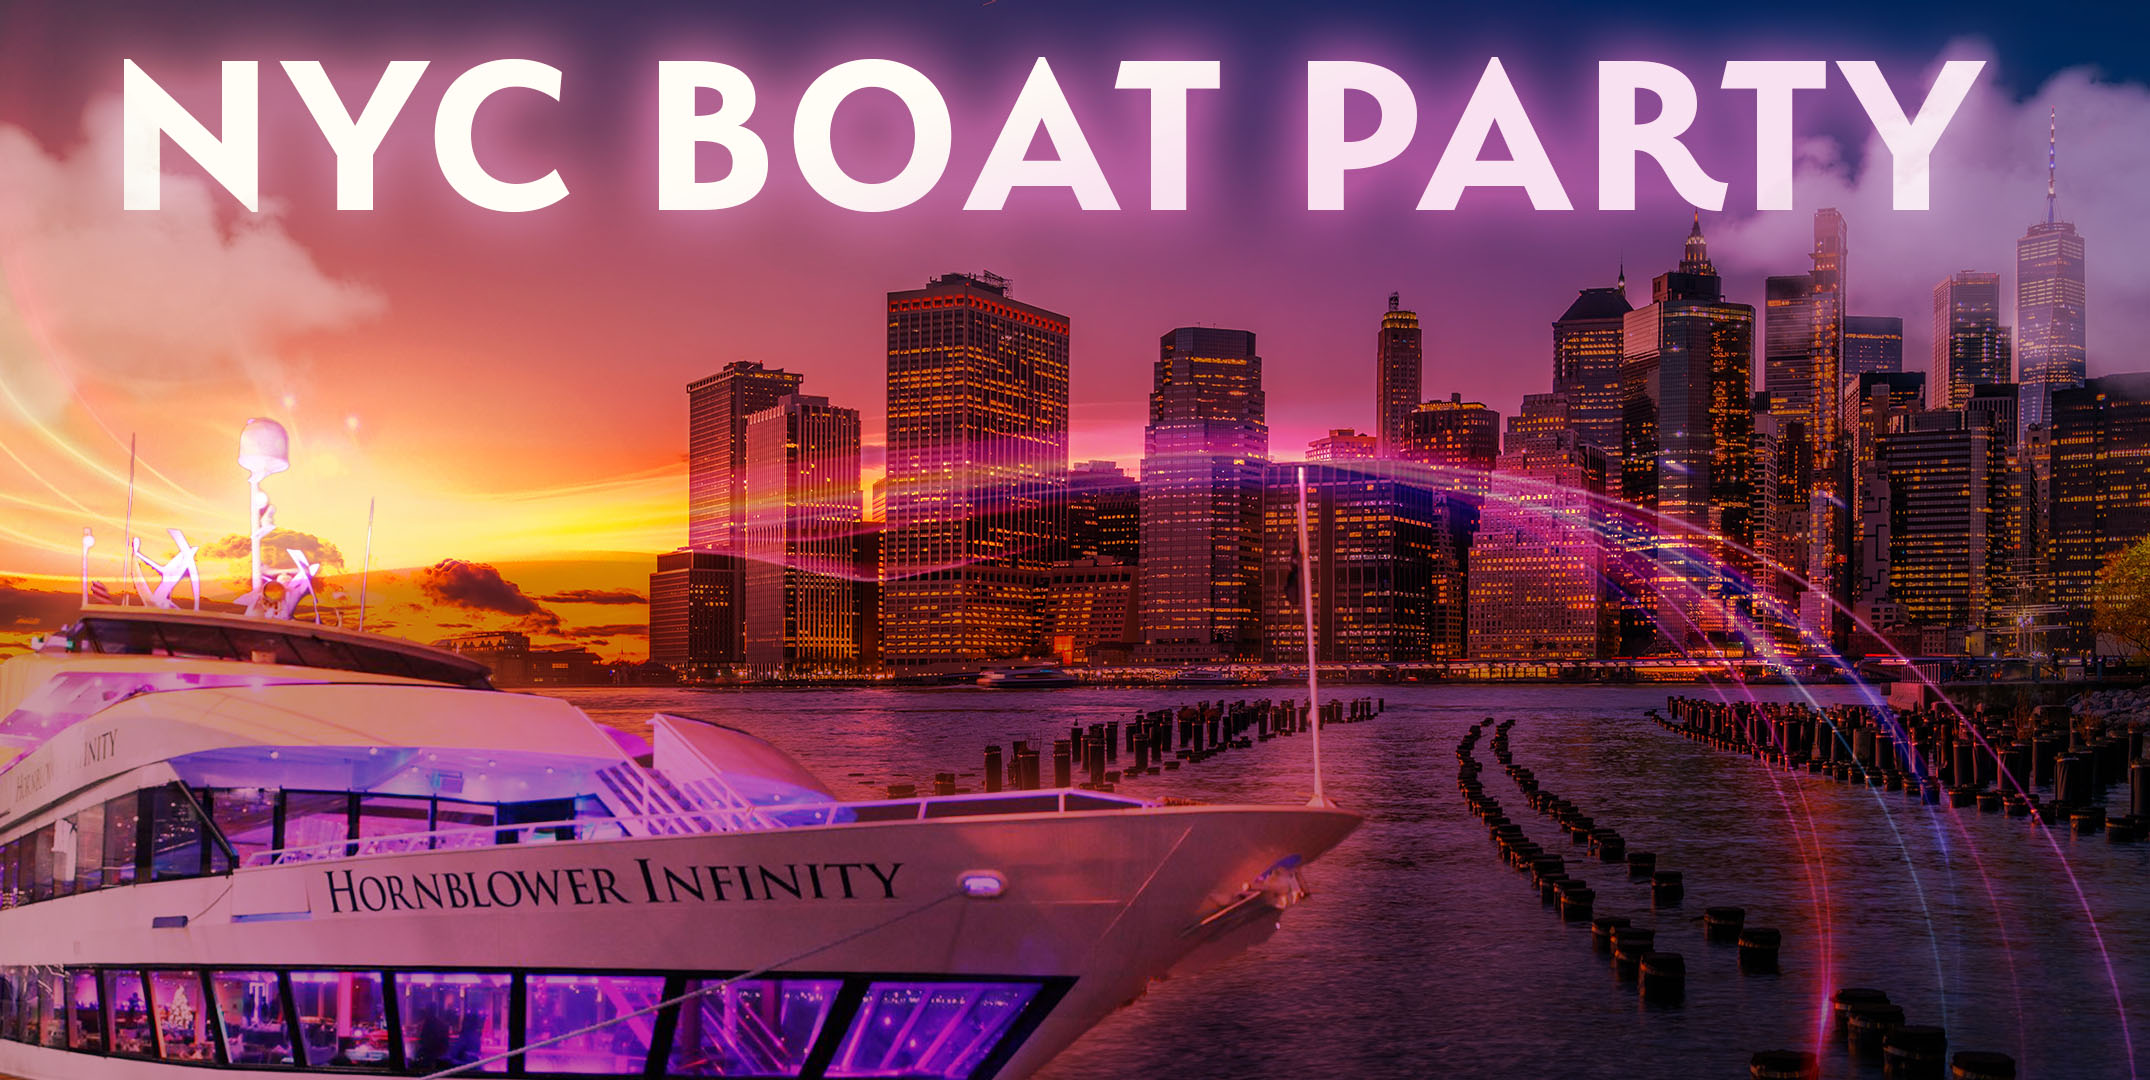 Buy Tickets to THE 1 NEW YORK CITY Boat Party Cruise MEGA YACHT